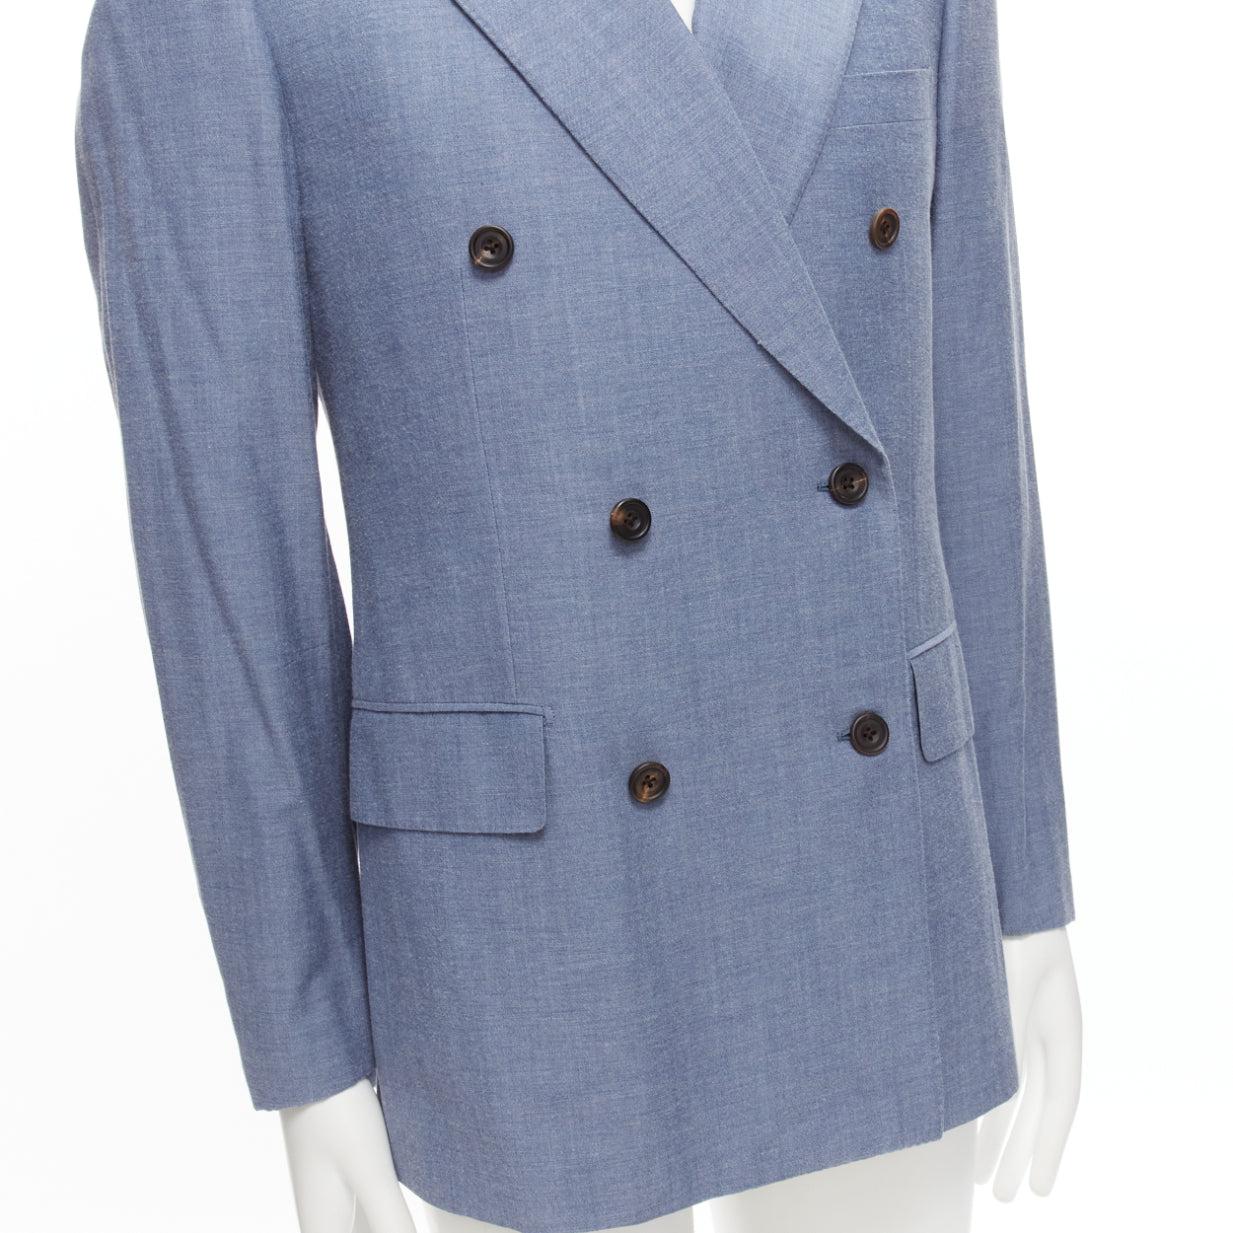 KINGSMAN blue wool cotton double breasted blazer jacket IT50 L
Reference: JSLE/A00071
Brand: Kingsman
Material: Wool, Cotton
Color: Blue
Pattern: Solid
Closure: Button
Lining: Navy Fabric
Extra Details: Double vent back. Padded shoulders.
Made in: